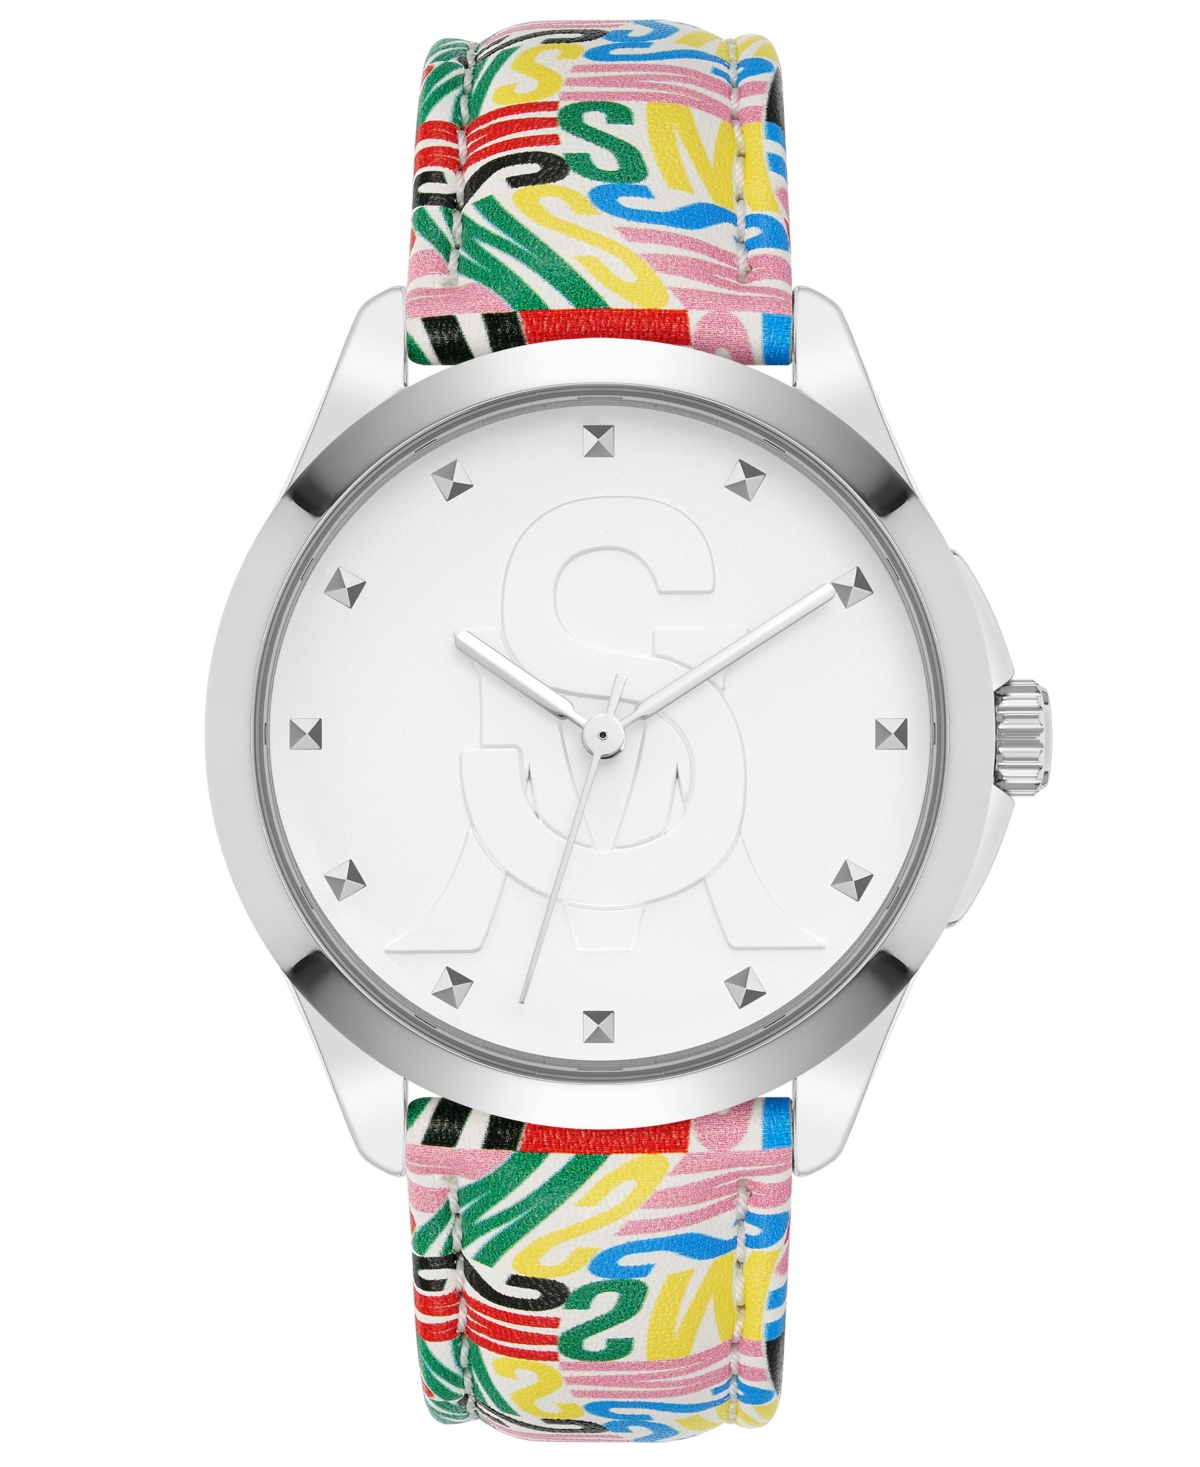 Women's Analog Multi-Color Sm Logo Synthetic Leather Watch, 38mm - Silver-Tone, Multi